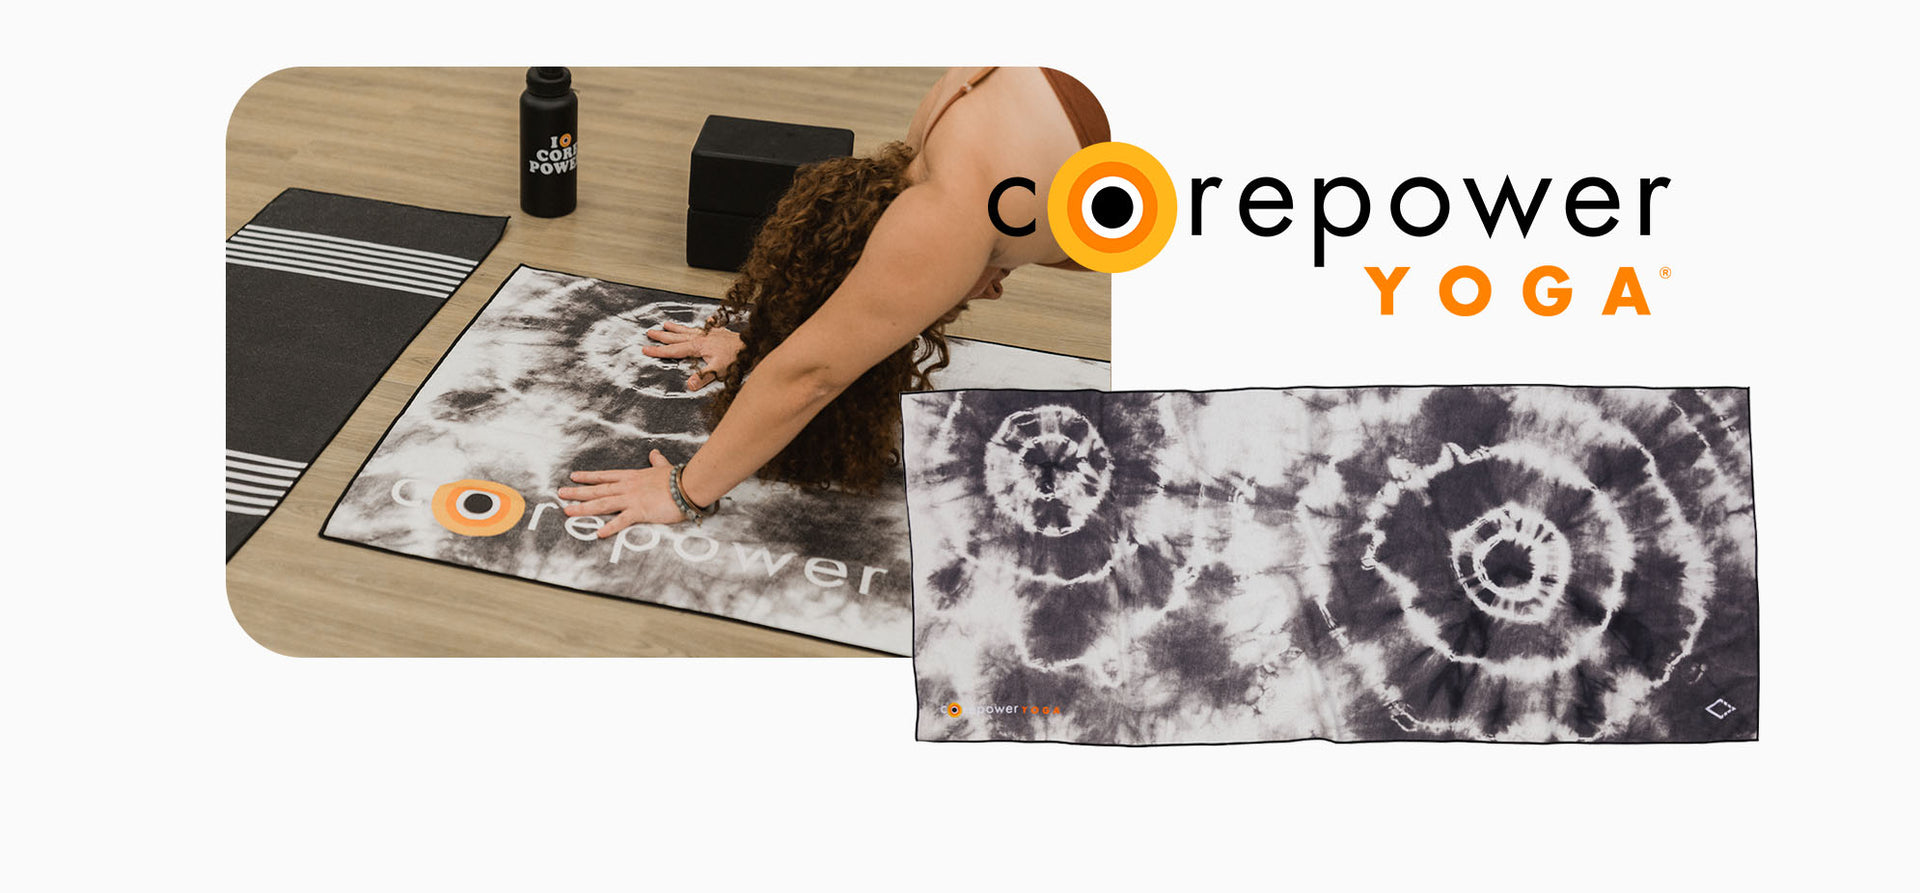 Samples of custom Corepower Yoga towels that Nomadix has made.